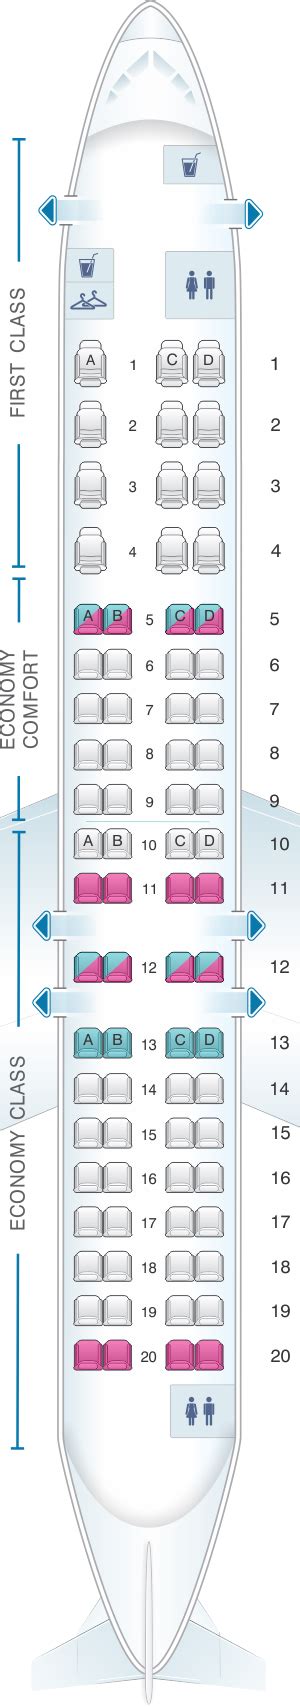 Economy. Seats 90. Pitch 31". Width 17". Recline 2". Travelers aboard Air Nostrum's Bombardier CRJ900 in economy class can expect a functional and inviting environment. Tailored for regional routes and 90 passengers, it offers essential comforts in a cozy setting. The crew remains attentive and dedicated, ensuring a satisfactory flight experience.. 